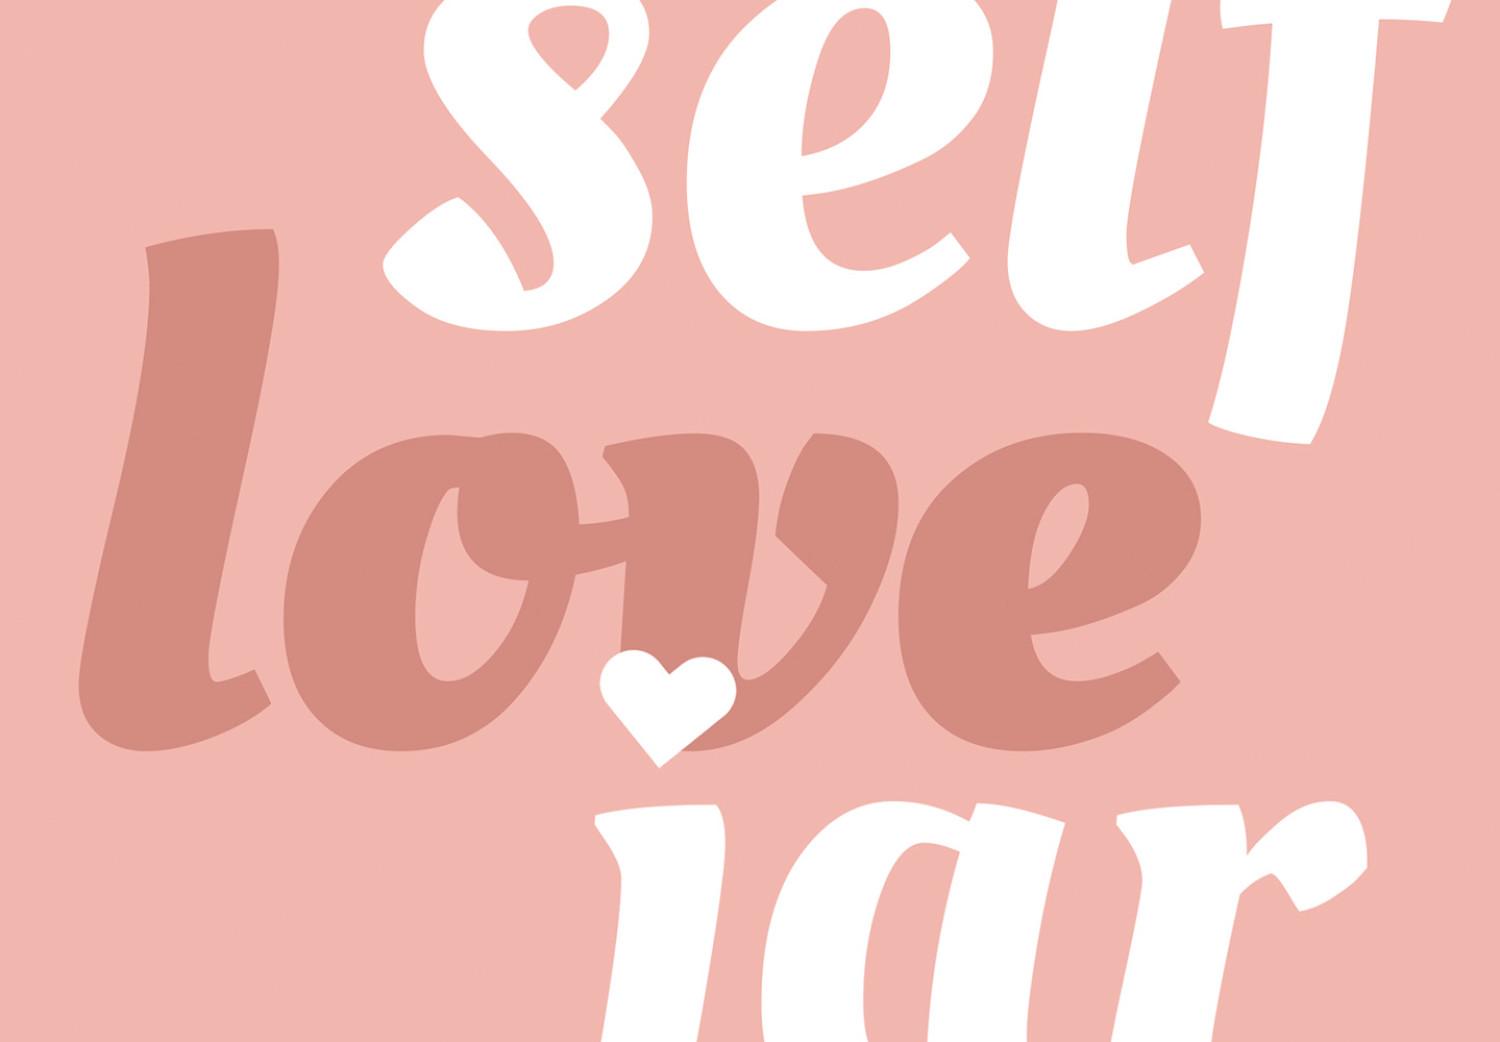 Canvas Self Love Jar (1-piece) Vertical - jar with heart and text in the background